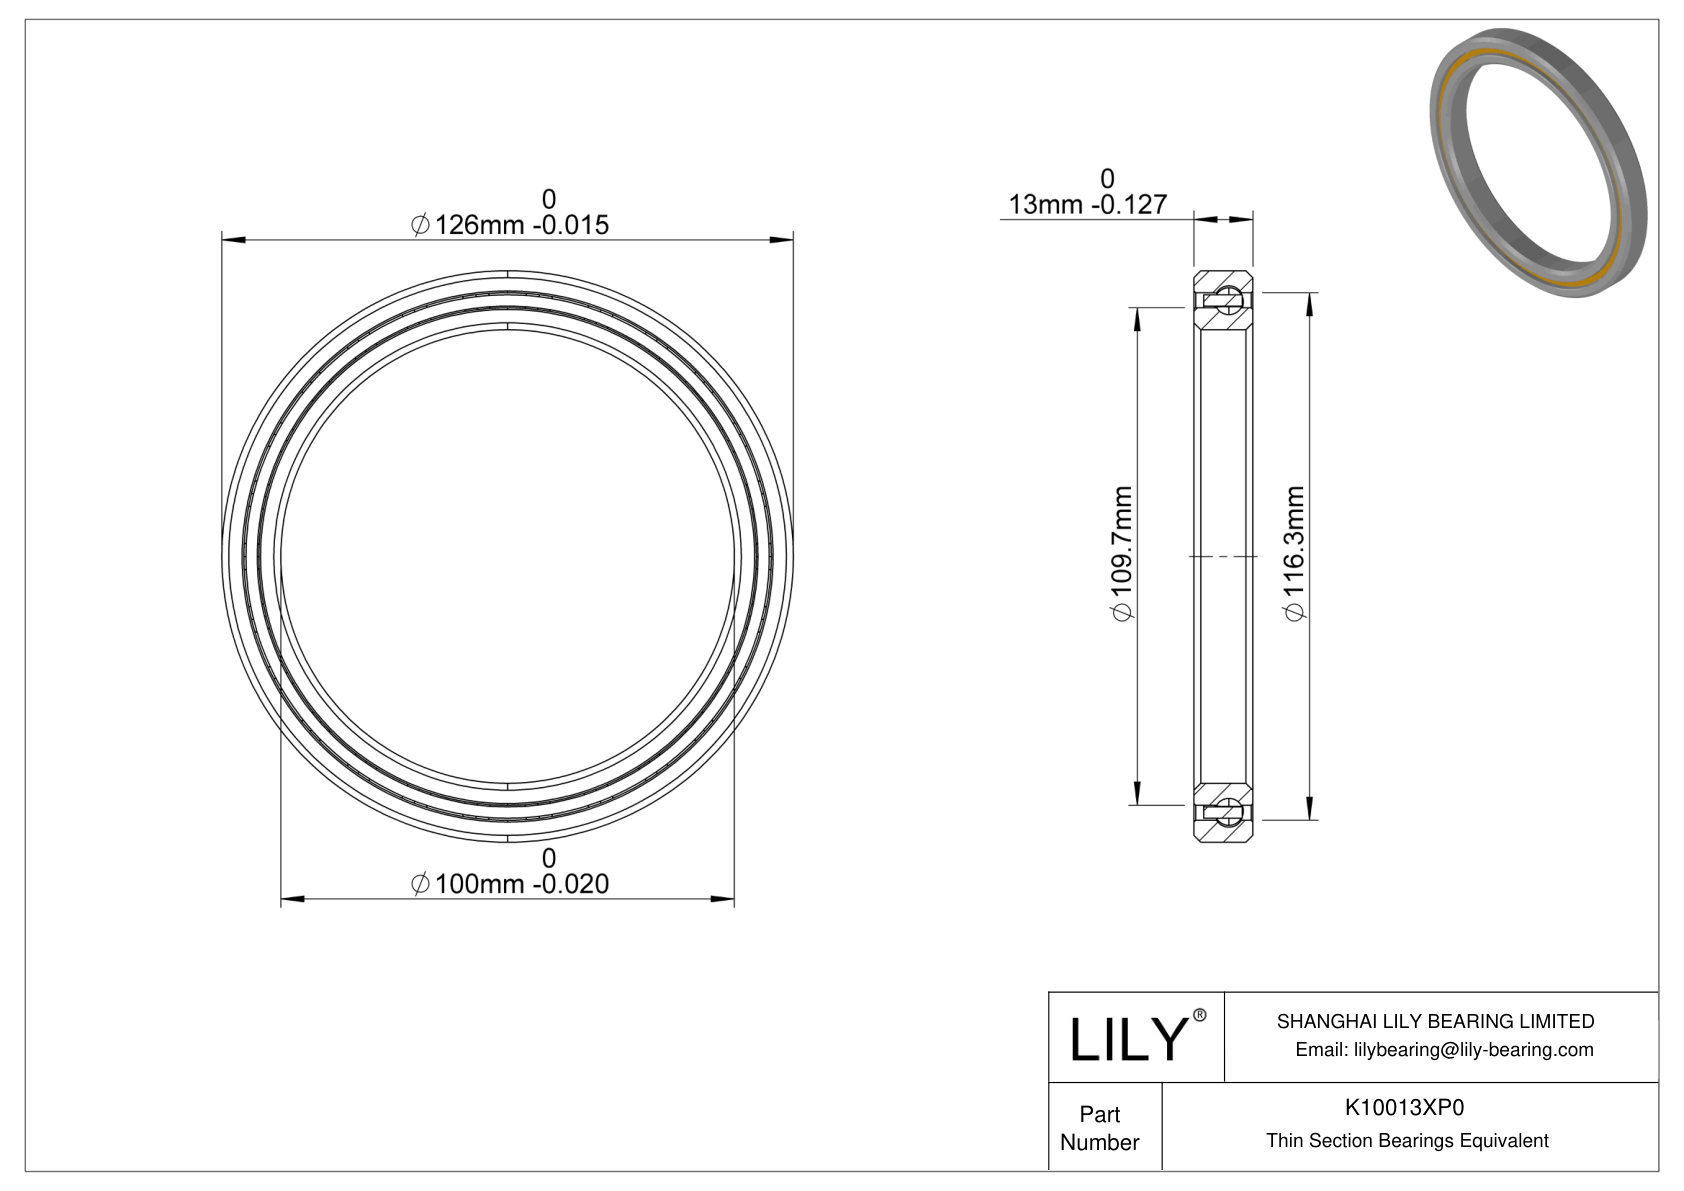 K10013XP0 Constant Section (CS) Bearings cad drawing